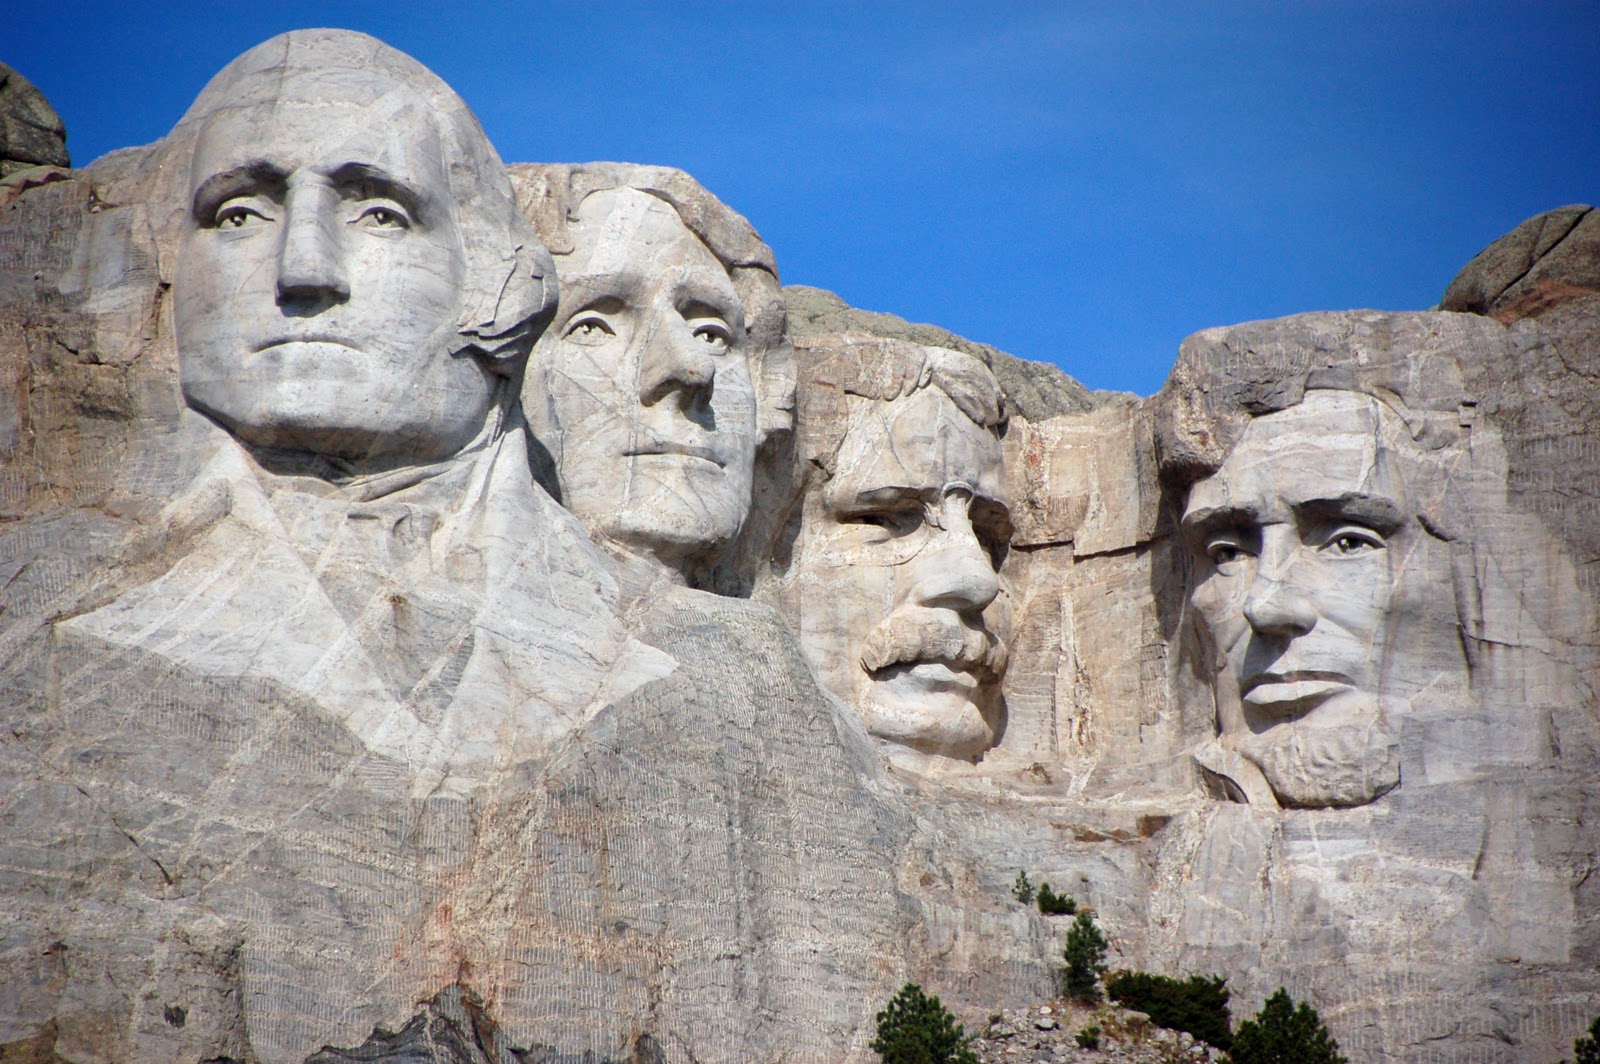 who carved the faces on mount rushmore